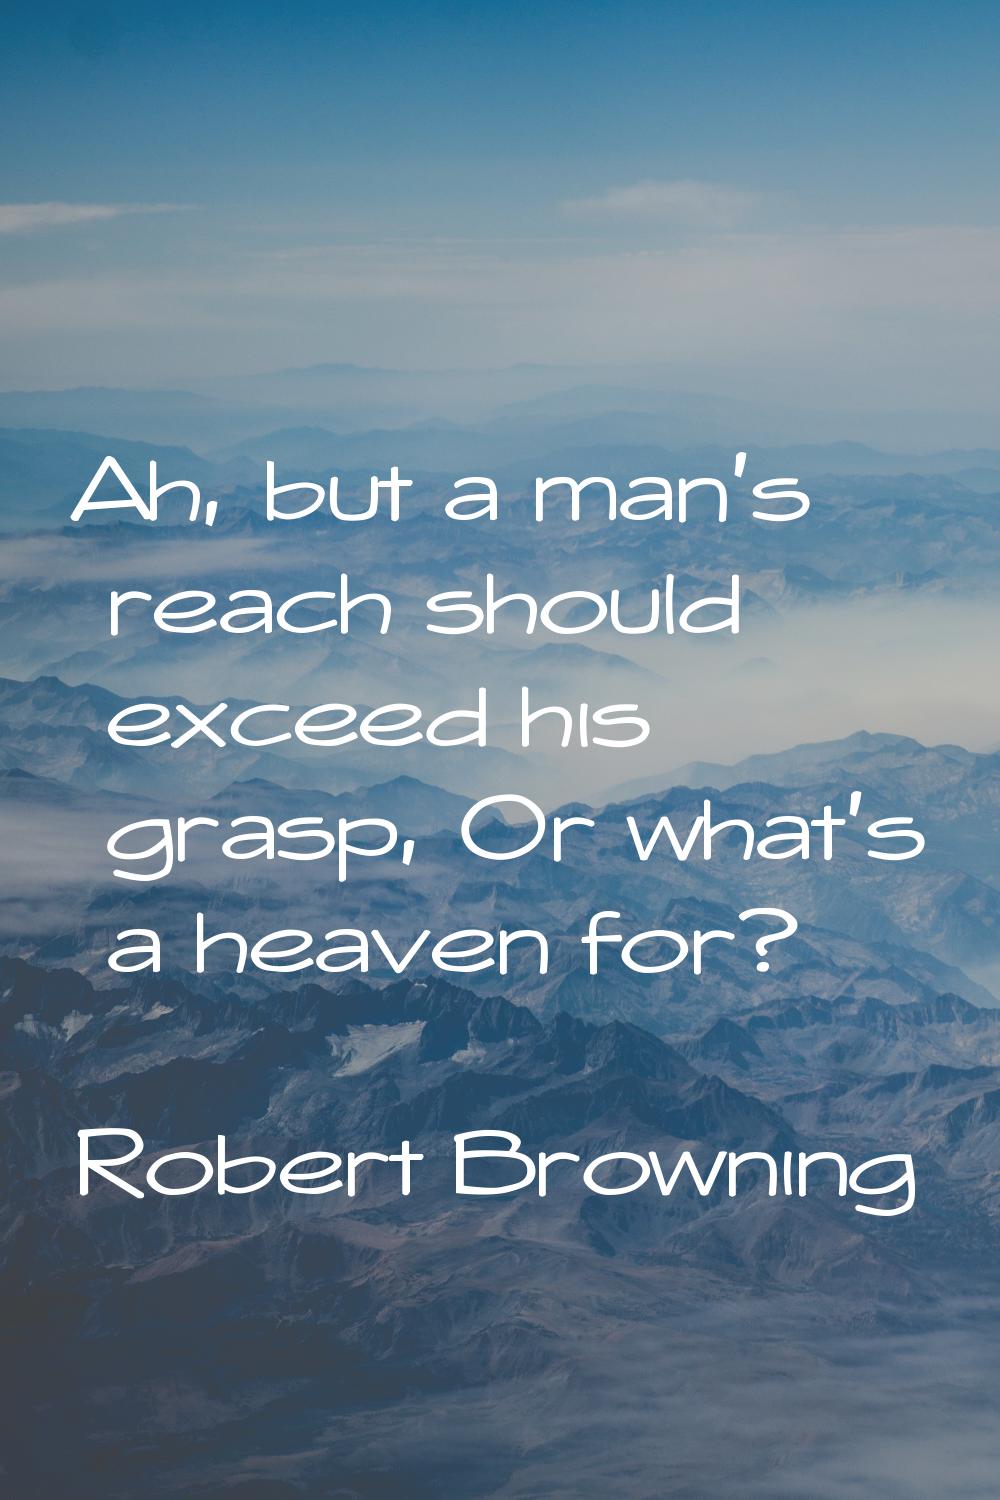 Ah, but a man's reach should exceed his grasp, Or what's a heaven for?